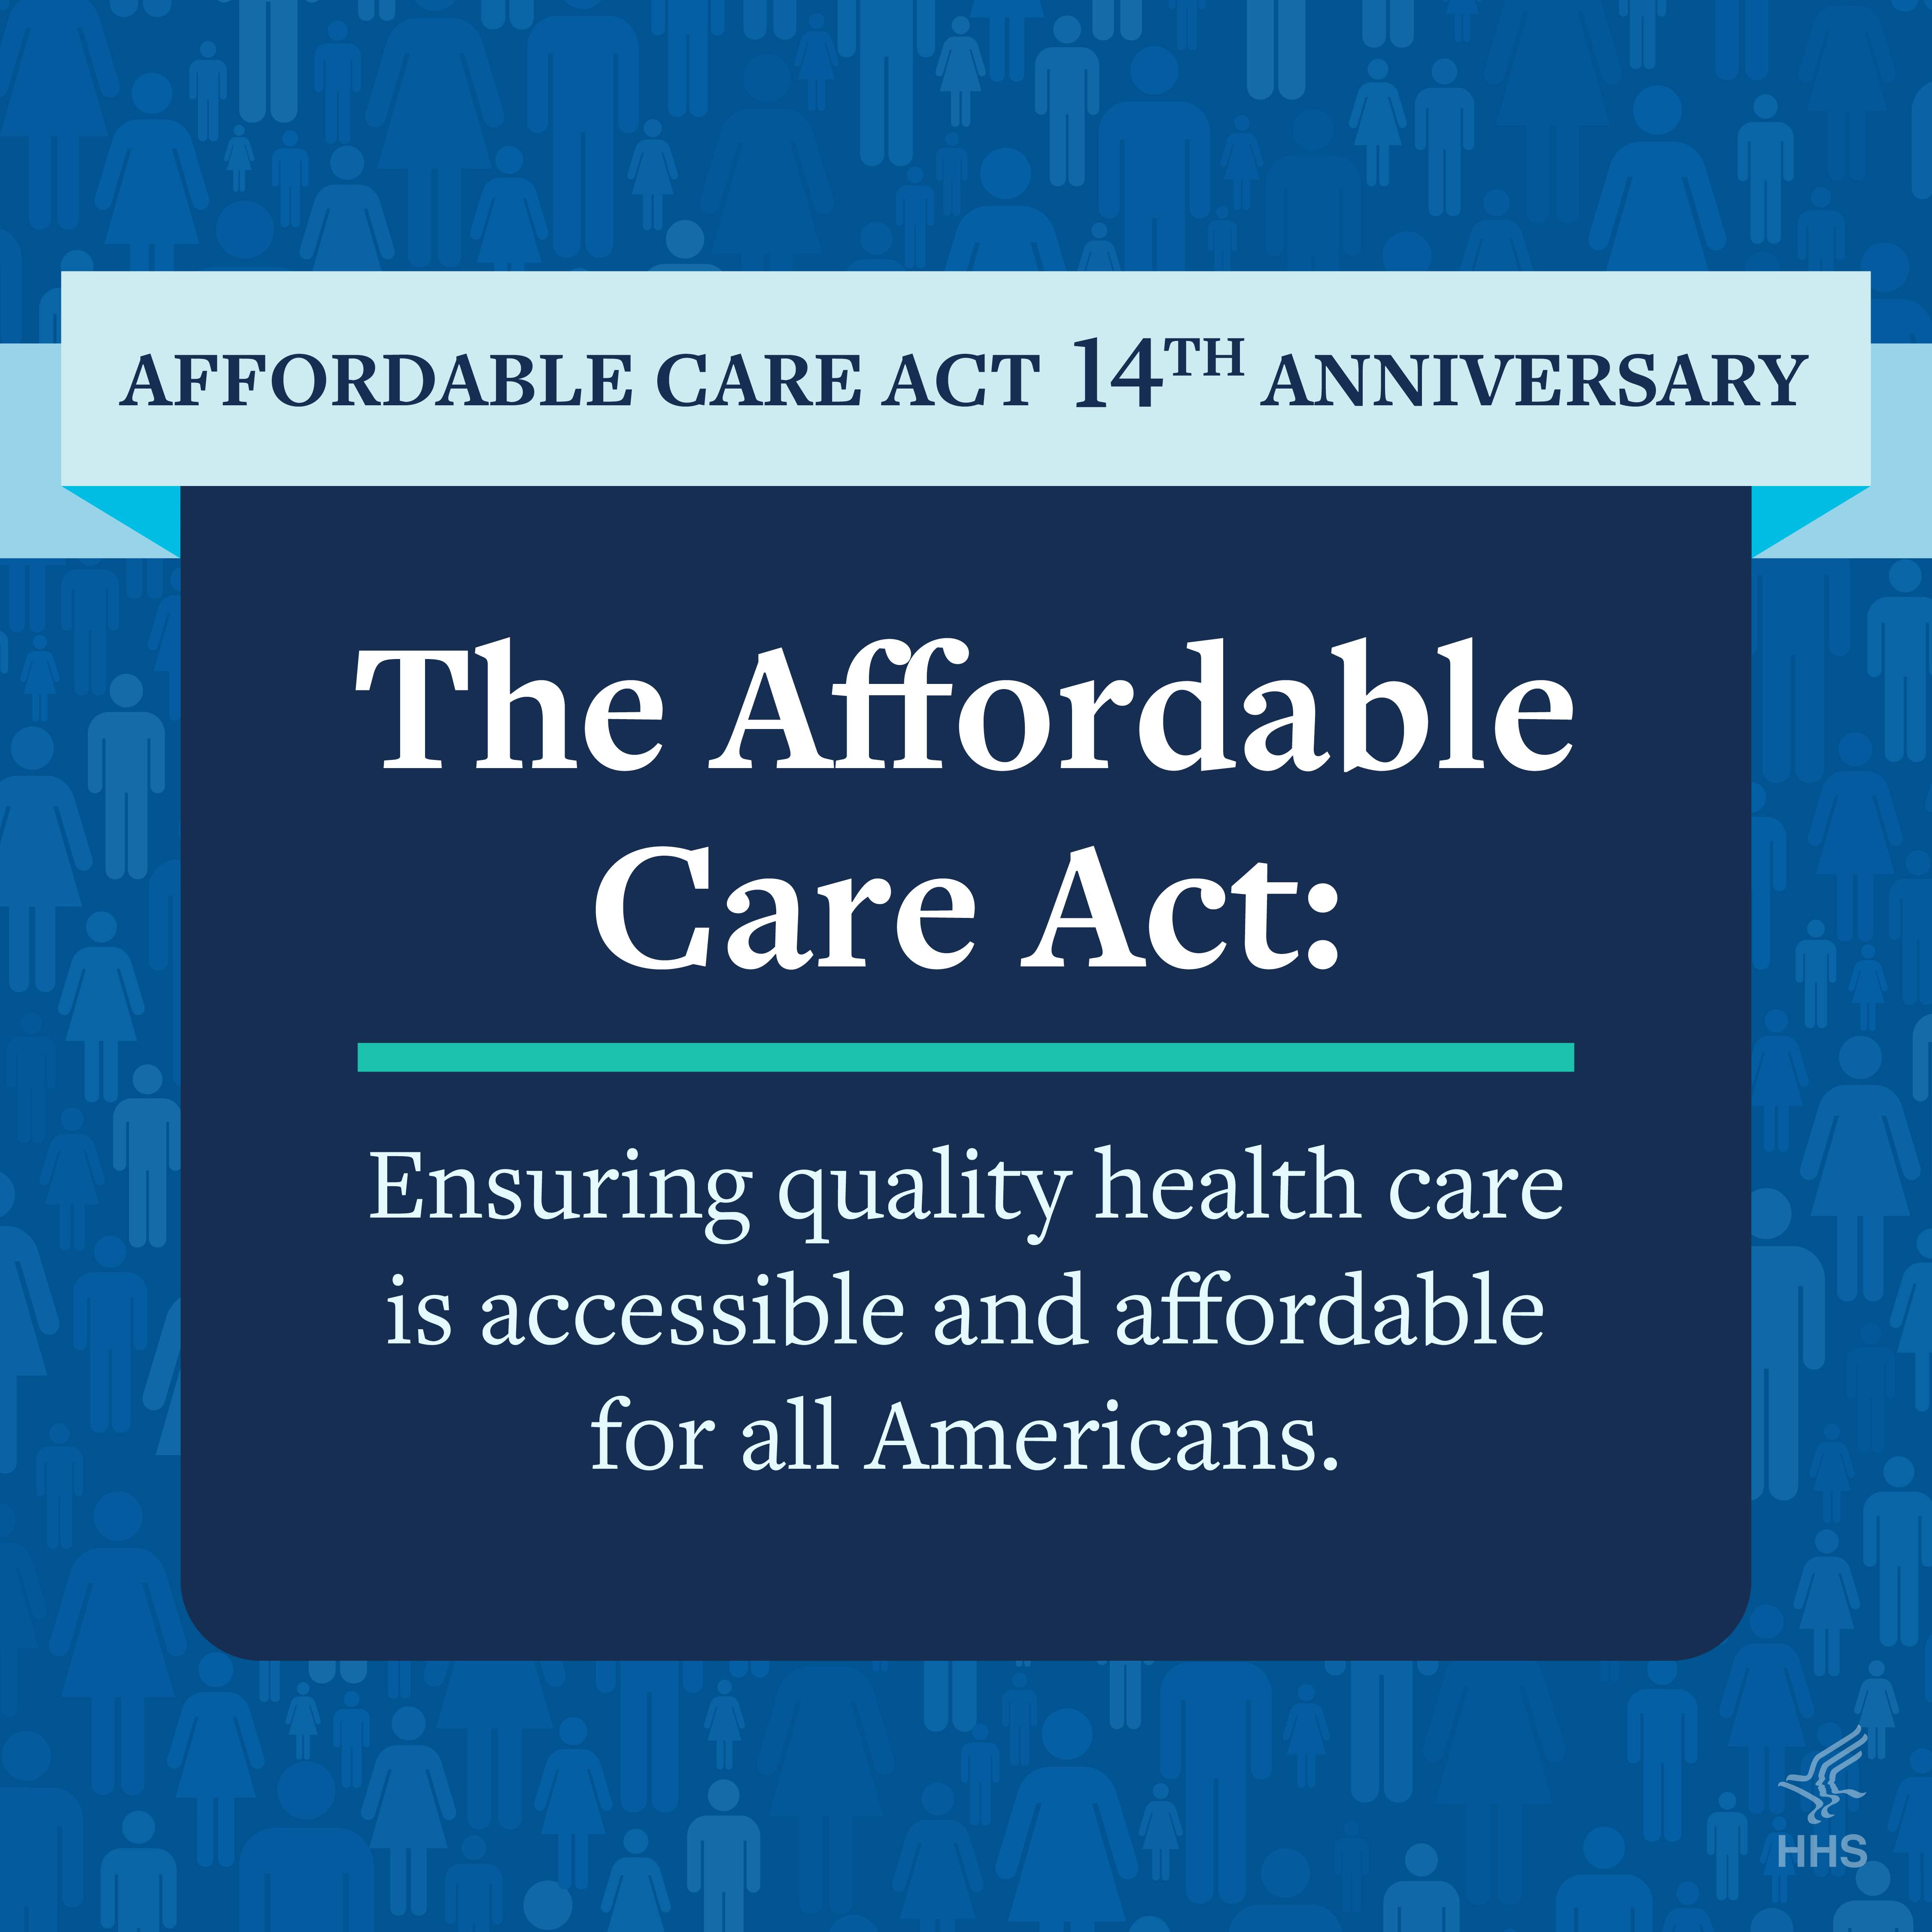 Affordable Care Act 14th Anniversary. The Affordable Care Act: Ensuring quality health care is accessible and affordable for all Americans